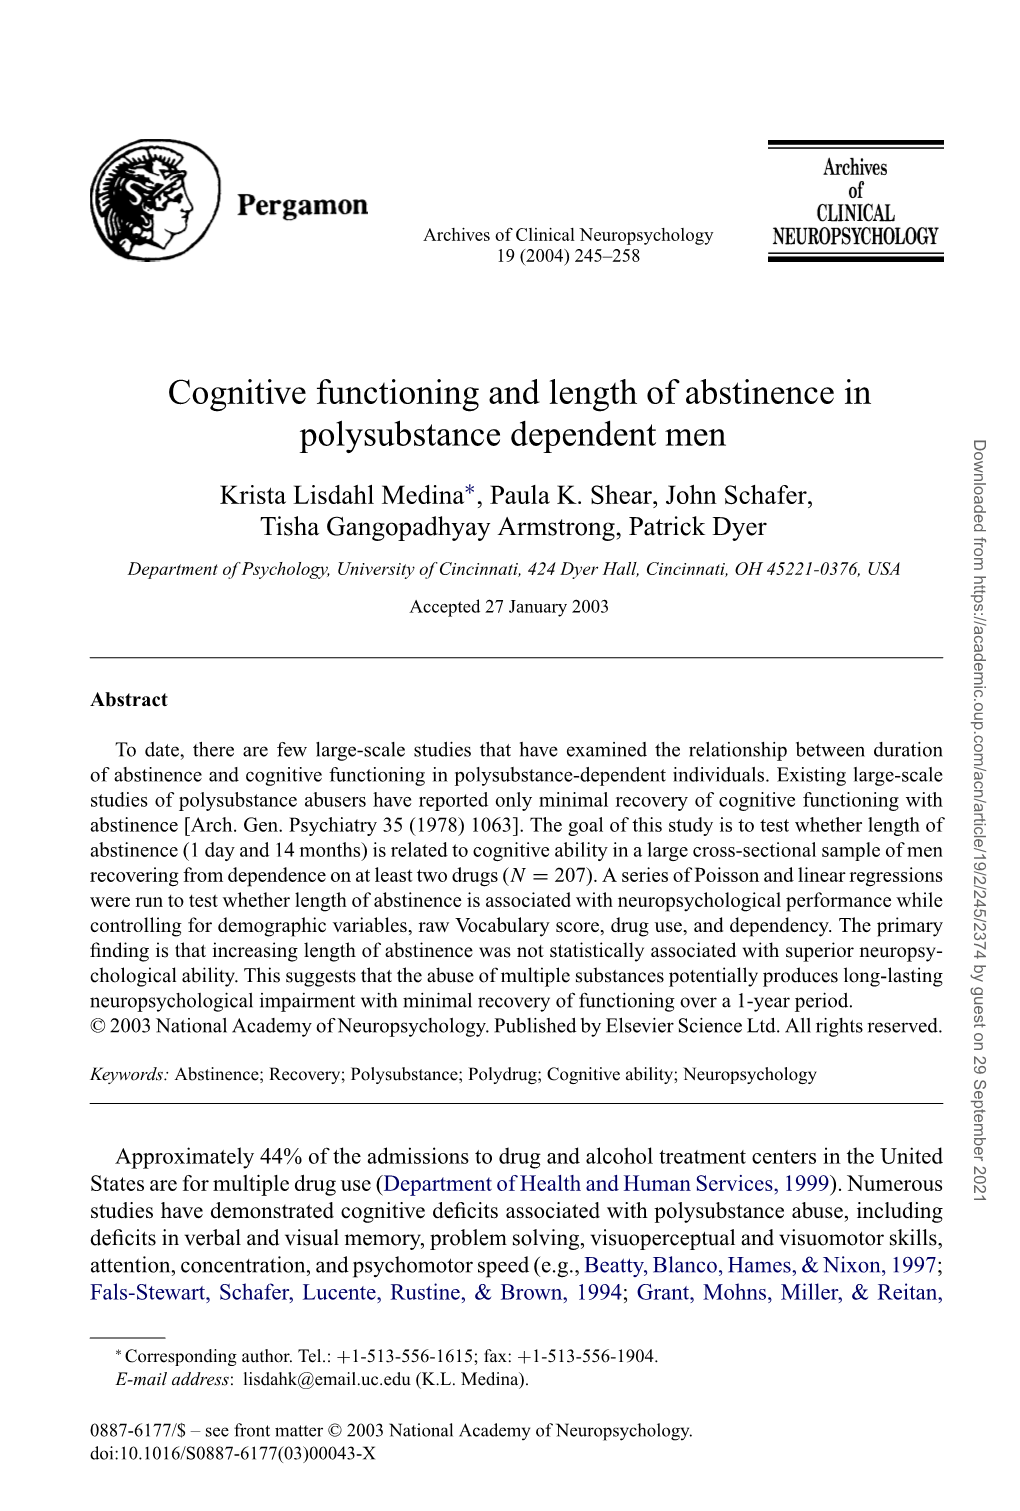 Cognitive Functioning and Length of Abstinence in Polysubstance